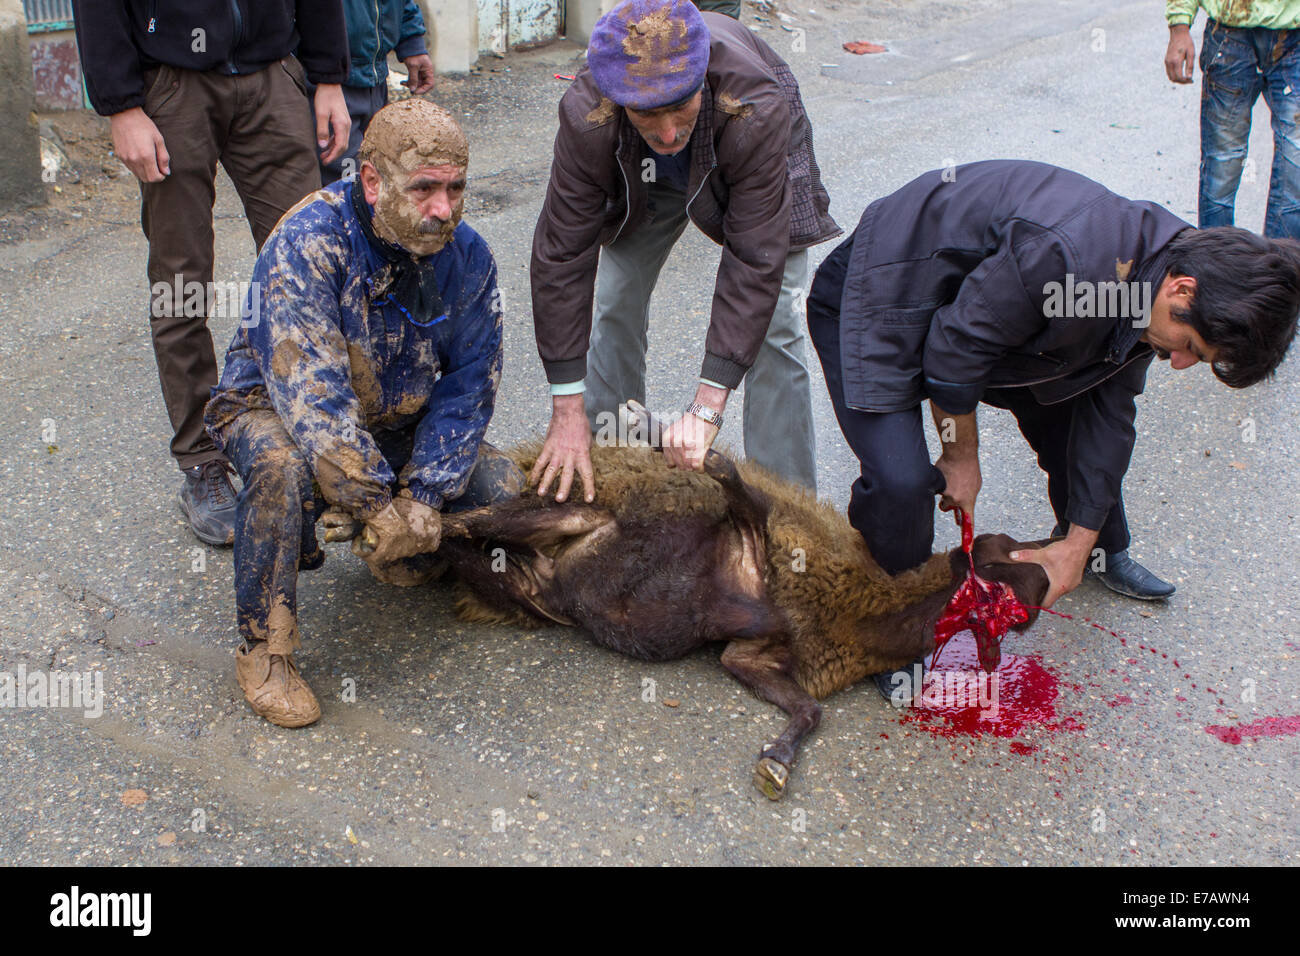 Shiite Muslim men, covered with mud, are ritually killing a sheep in Bijar, Iran, during the Day of Ashura. Stock Photo